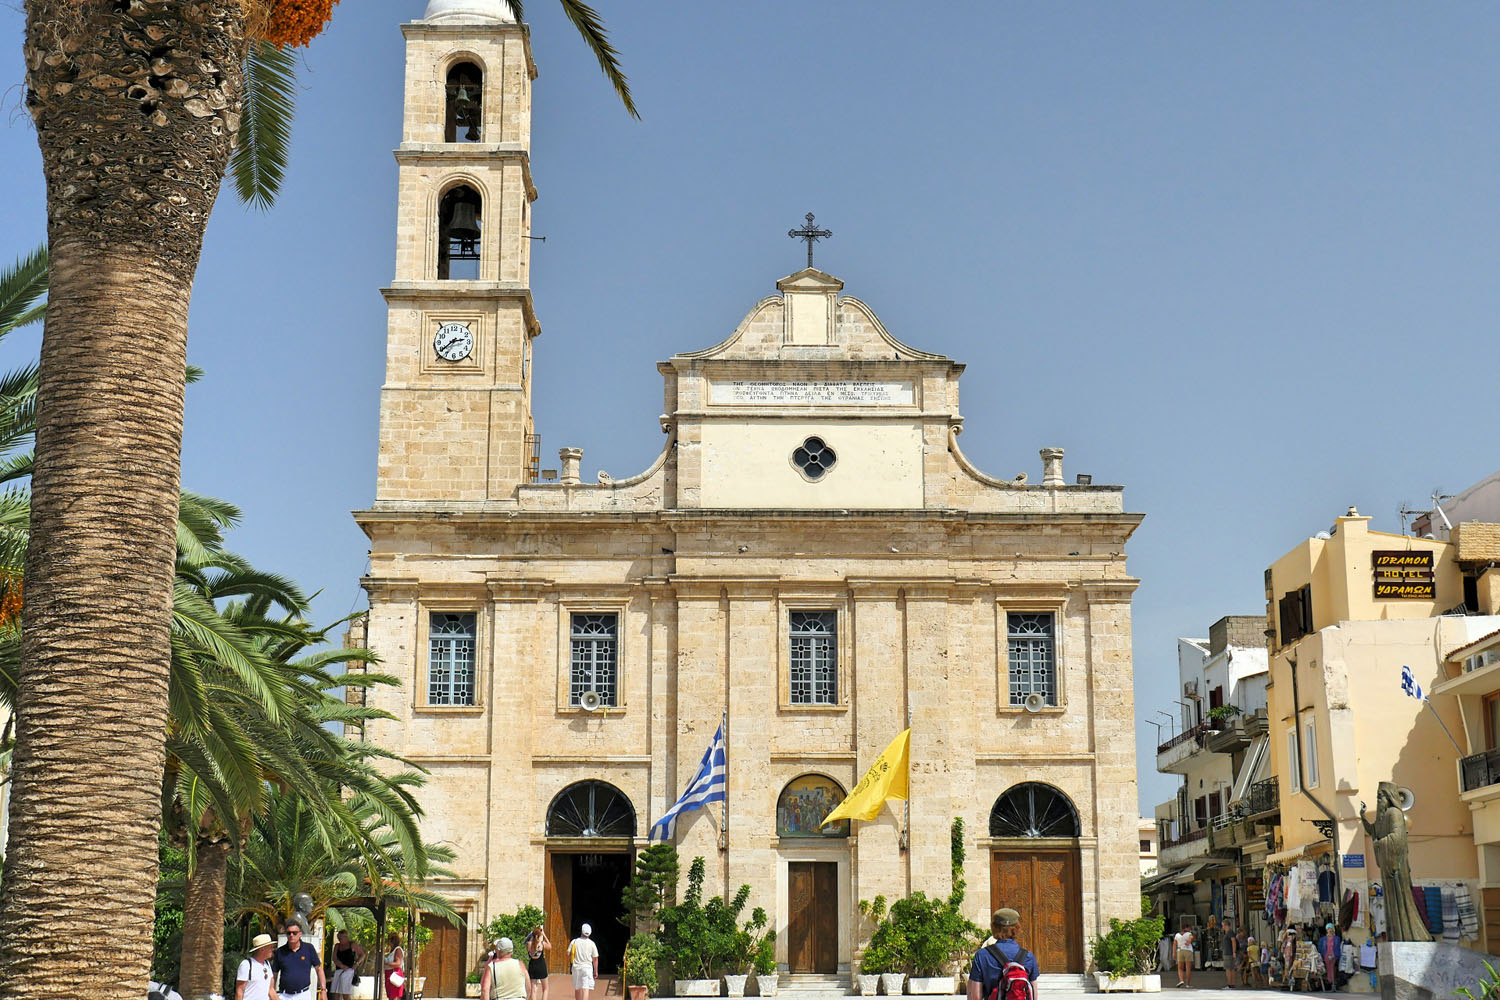 Church at the center of Chania